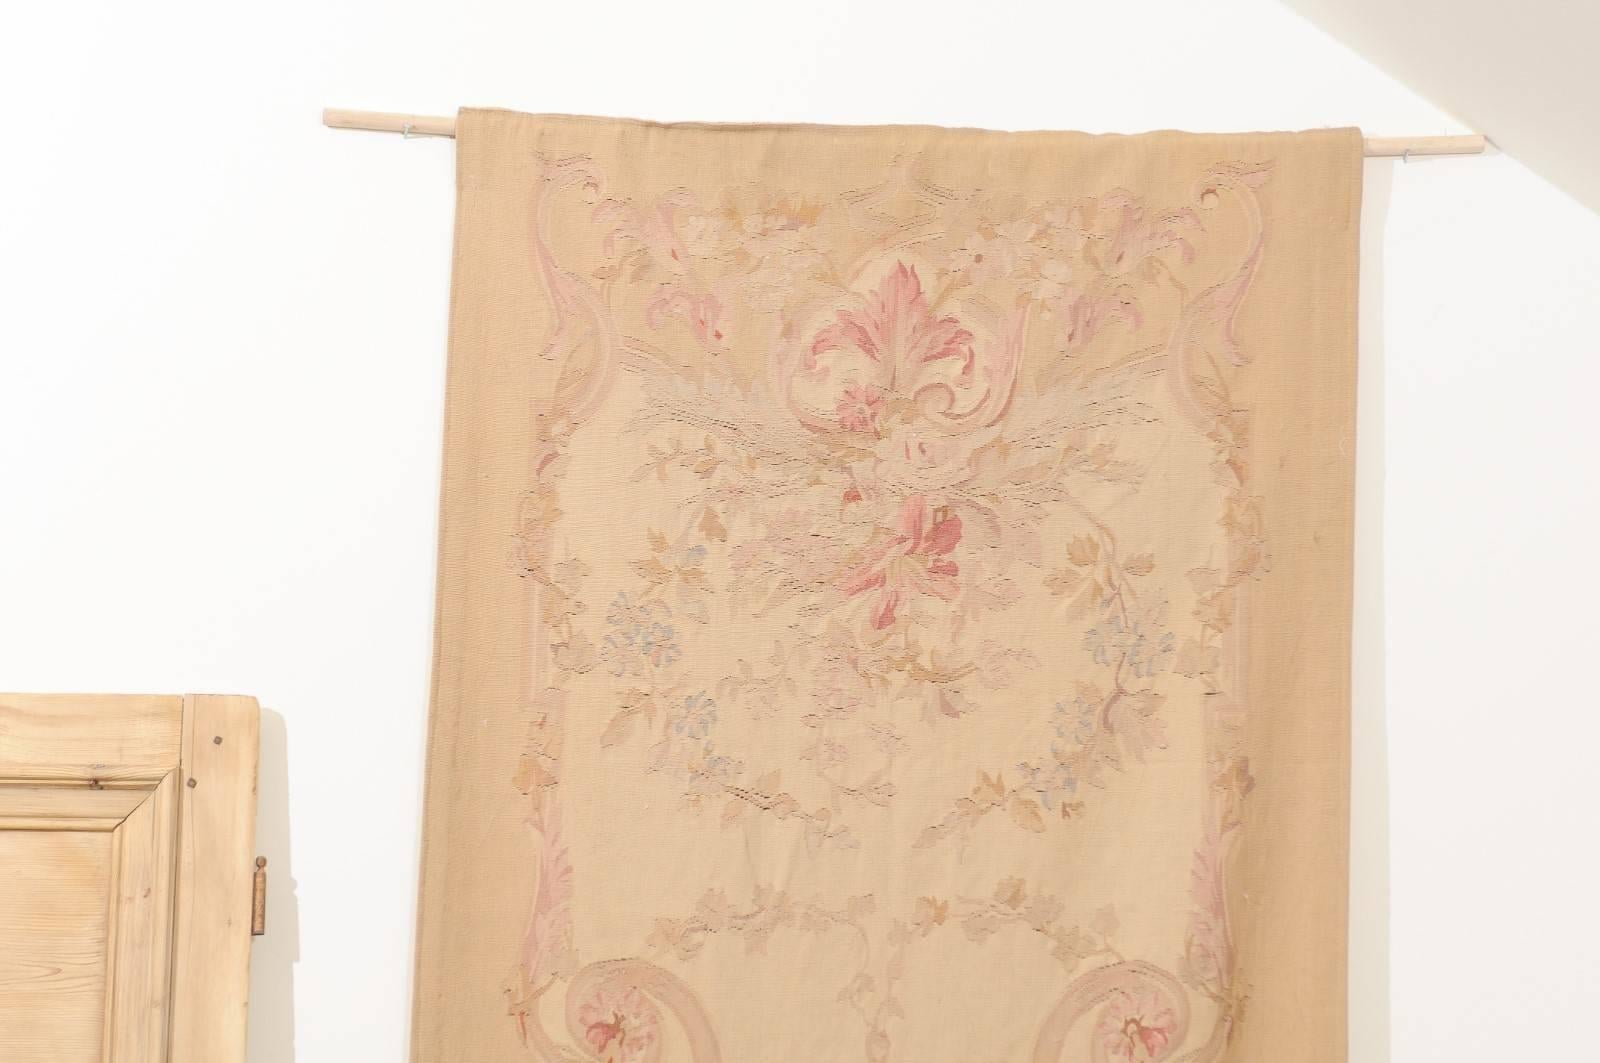 French 19th Century Vertical Hand-Woven Tapestry with Floral Décor and Volutes In Good Condition For Sale In Atlanta, GA